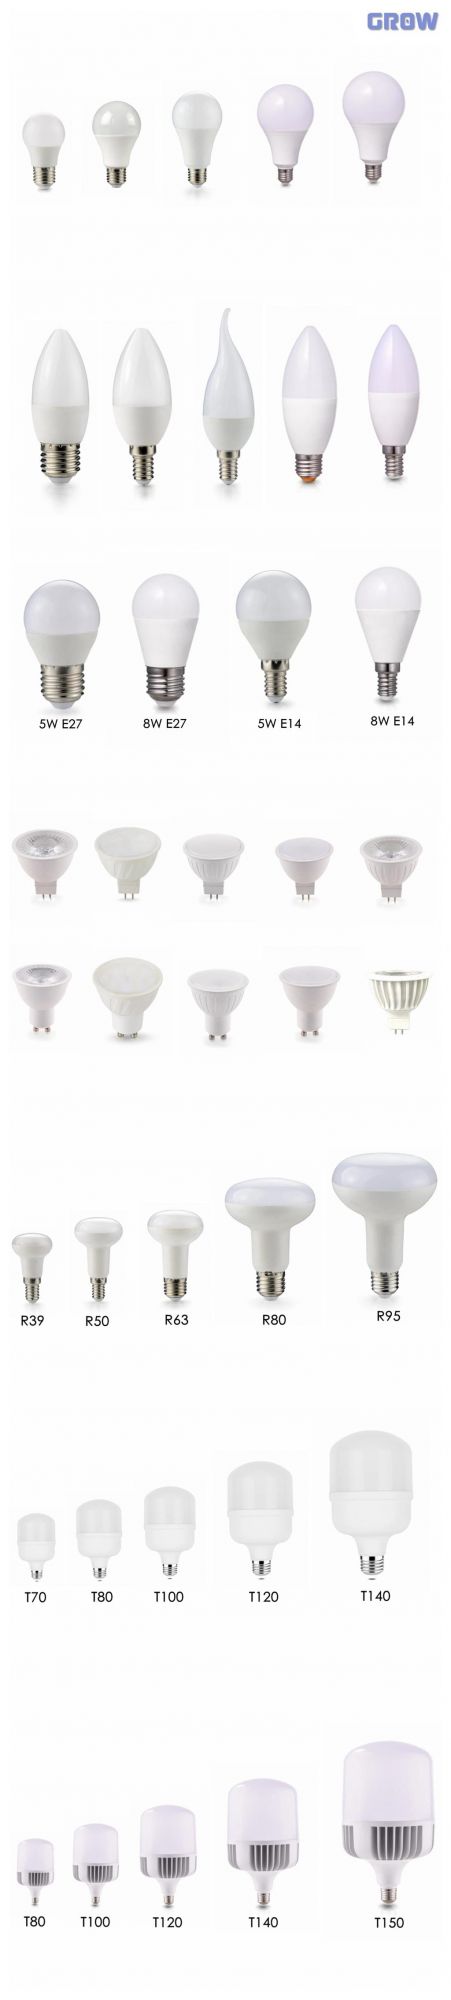 Chinese Factory LED Bulb GU10 5W Spotlight for Indoor Decoration Light Lamp